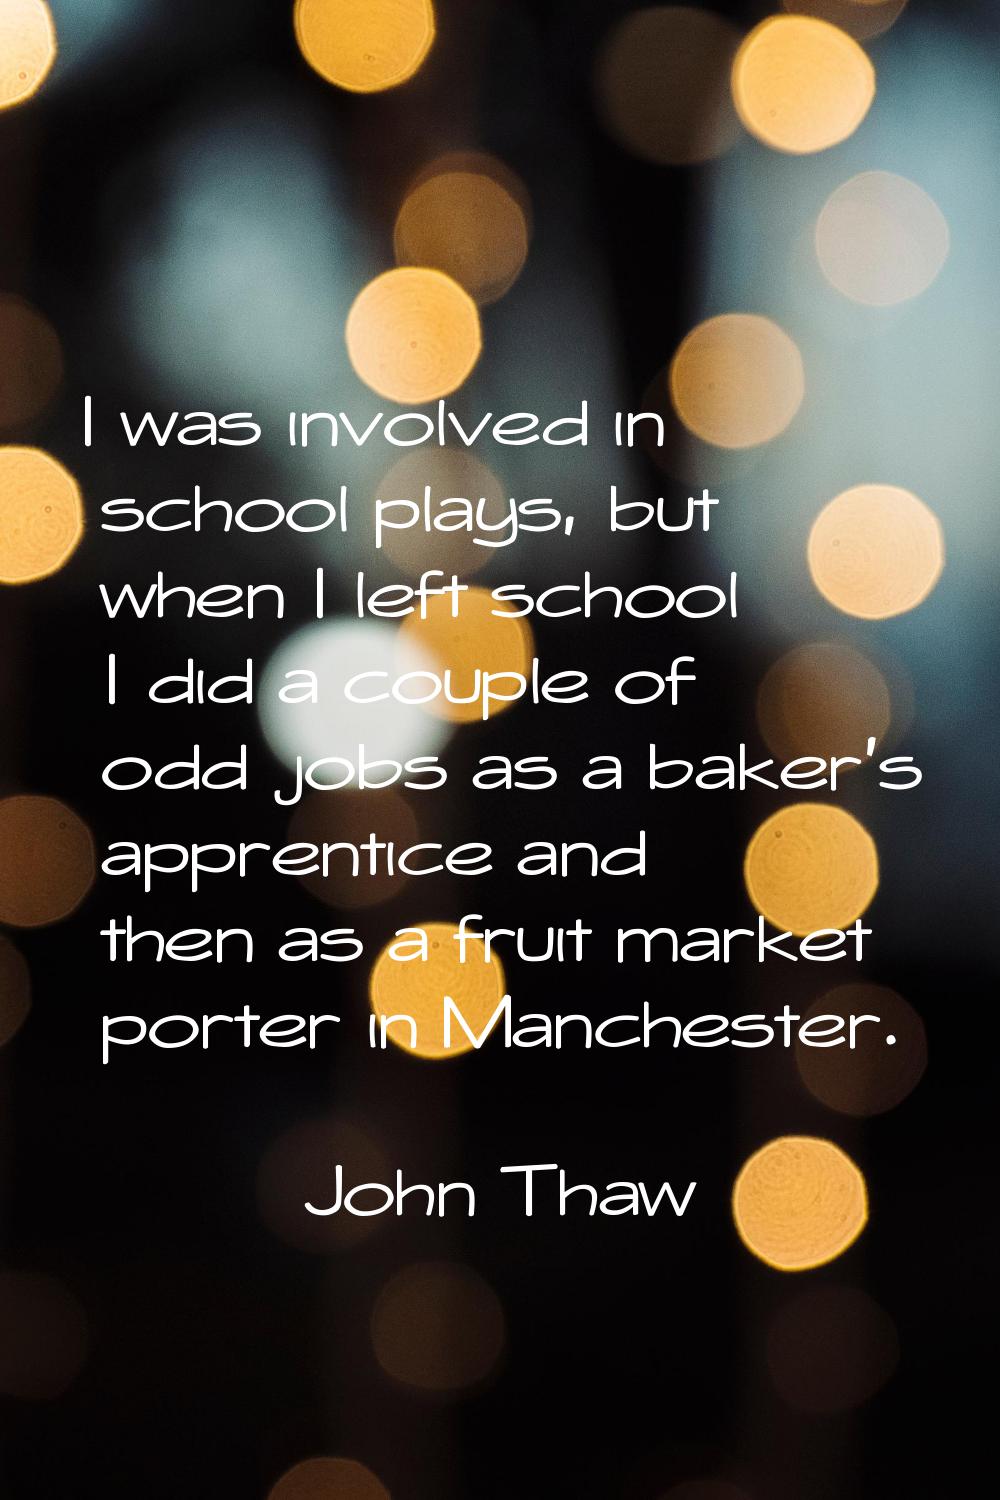 I was involved in school plays, but when I left school I did a couple of odd jobs as a baker's appr